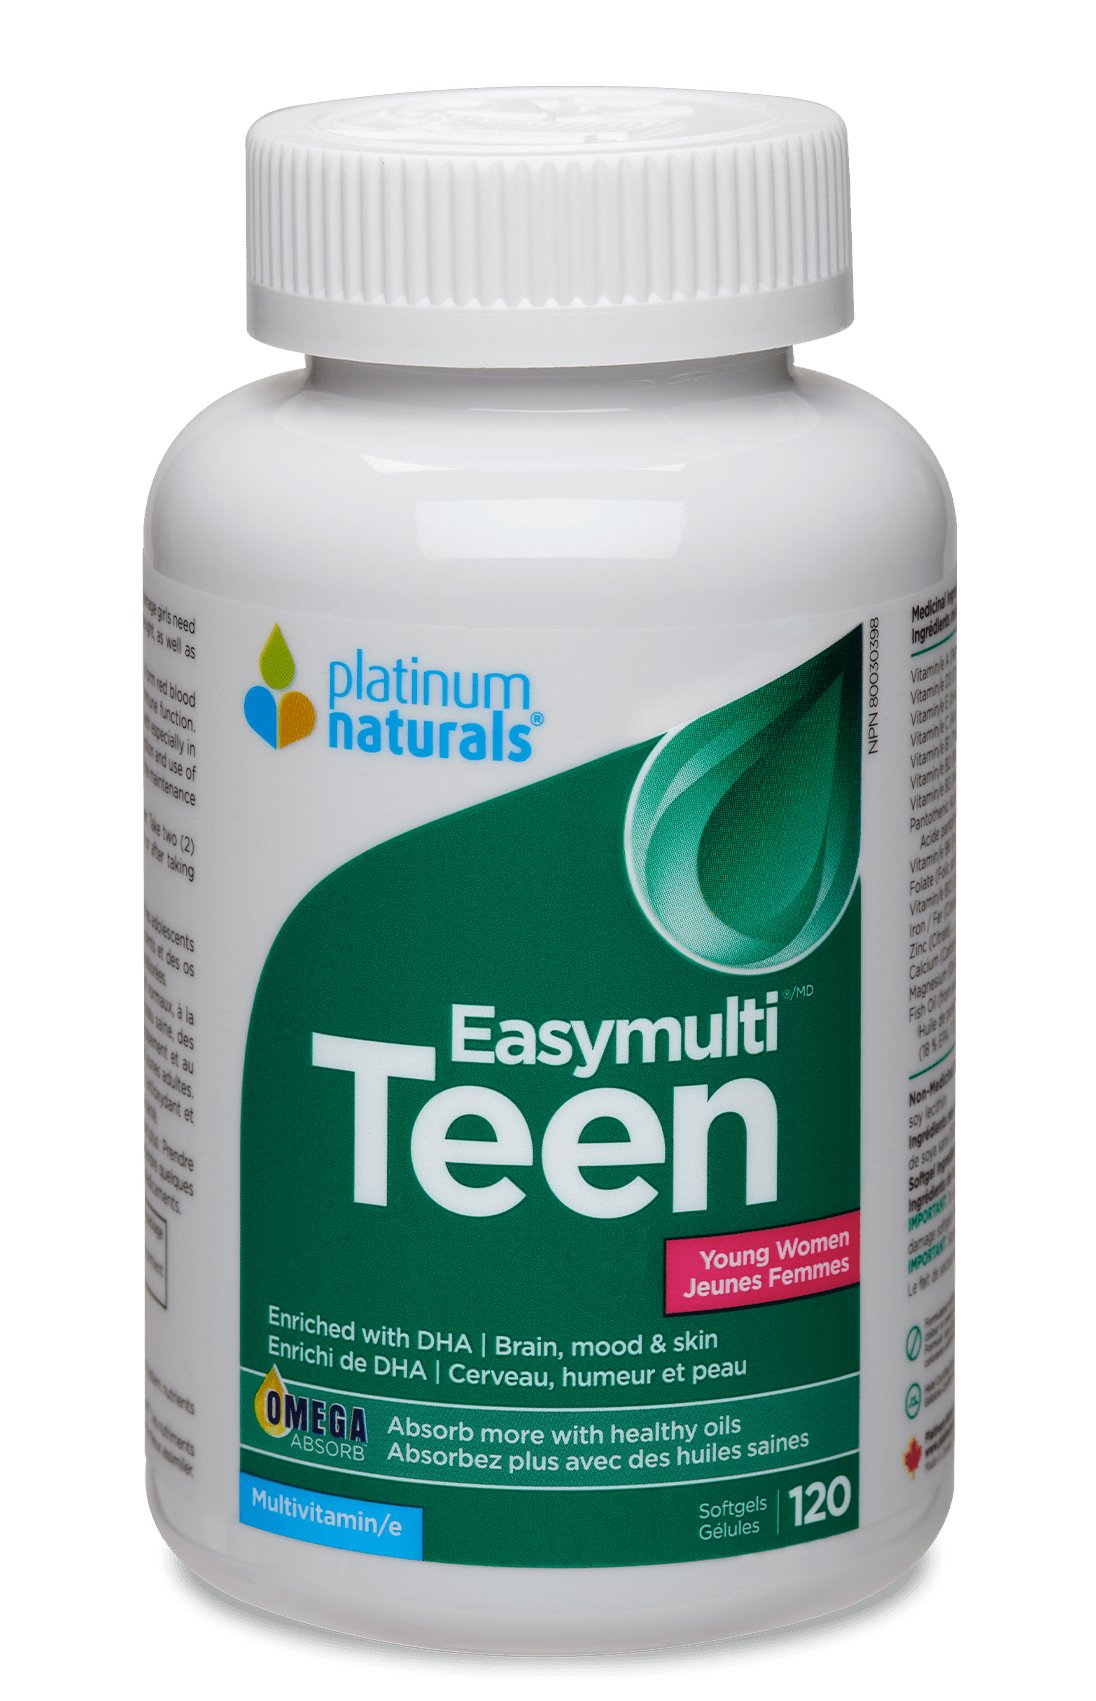 Platinum Naturals Easymulti Teen Young Women Teen Vitality 120 Softgels - Nutrition Plus